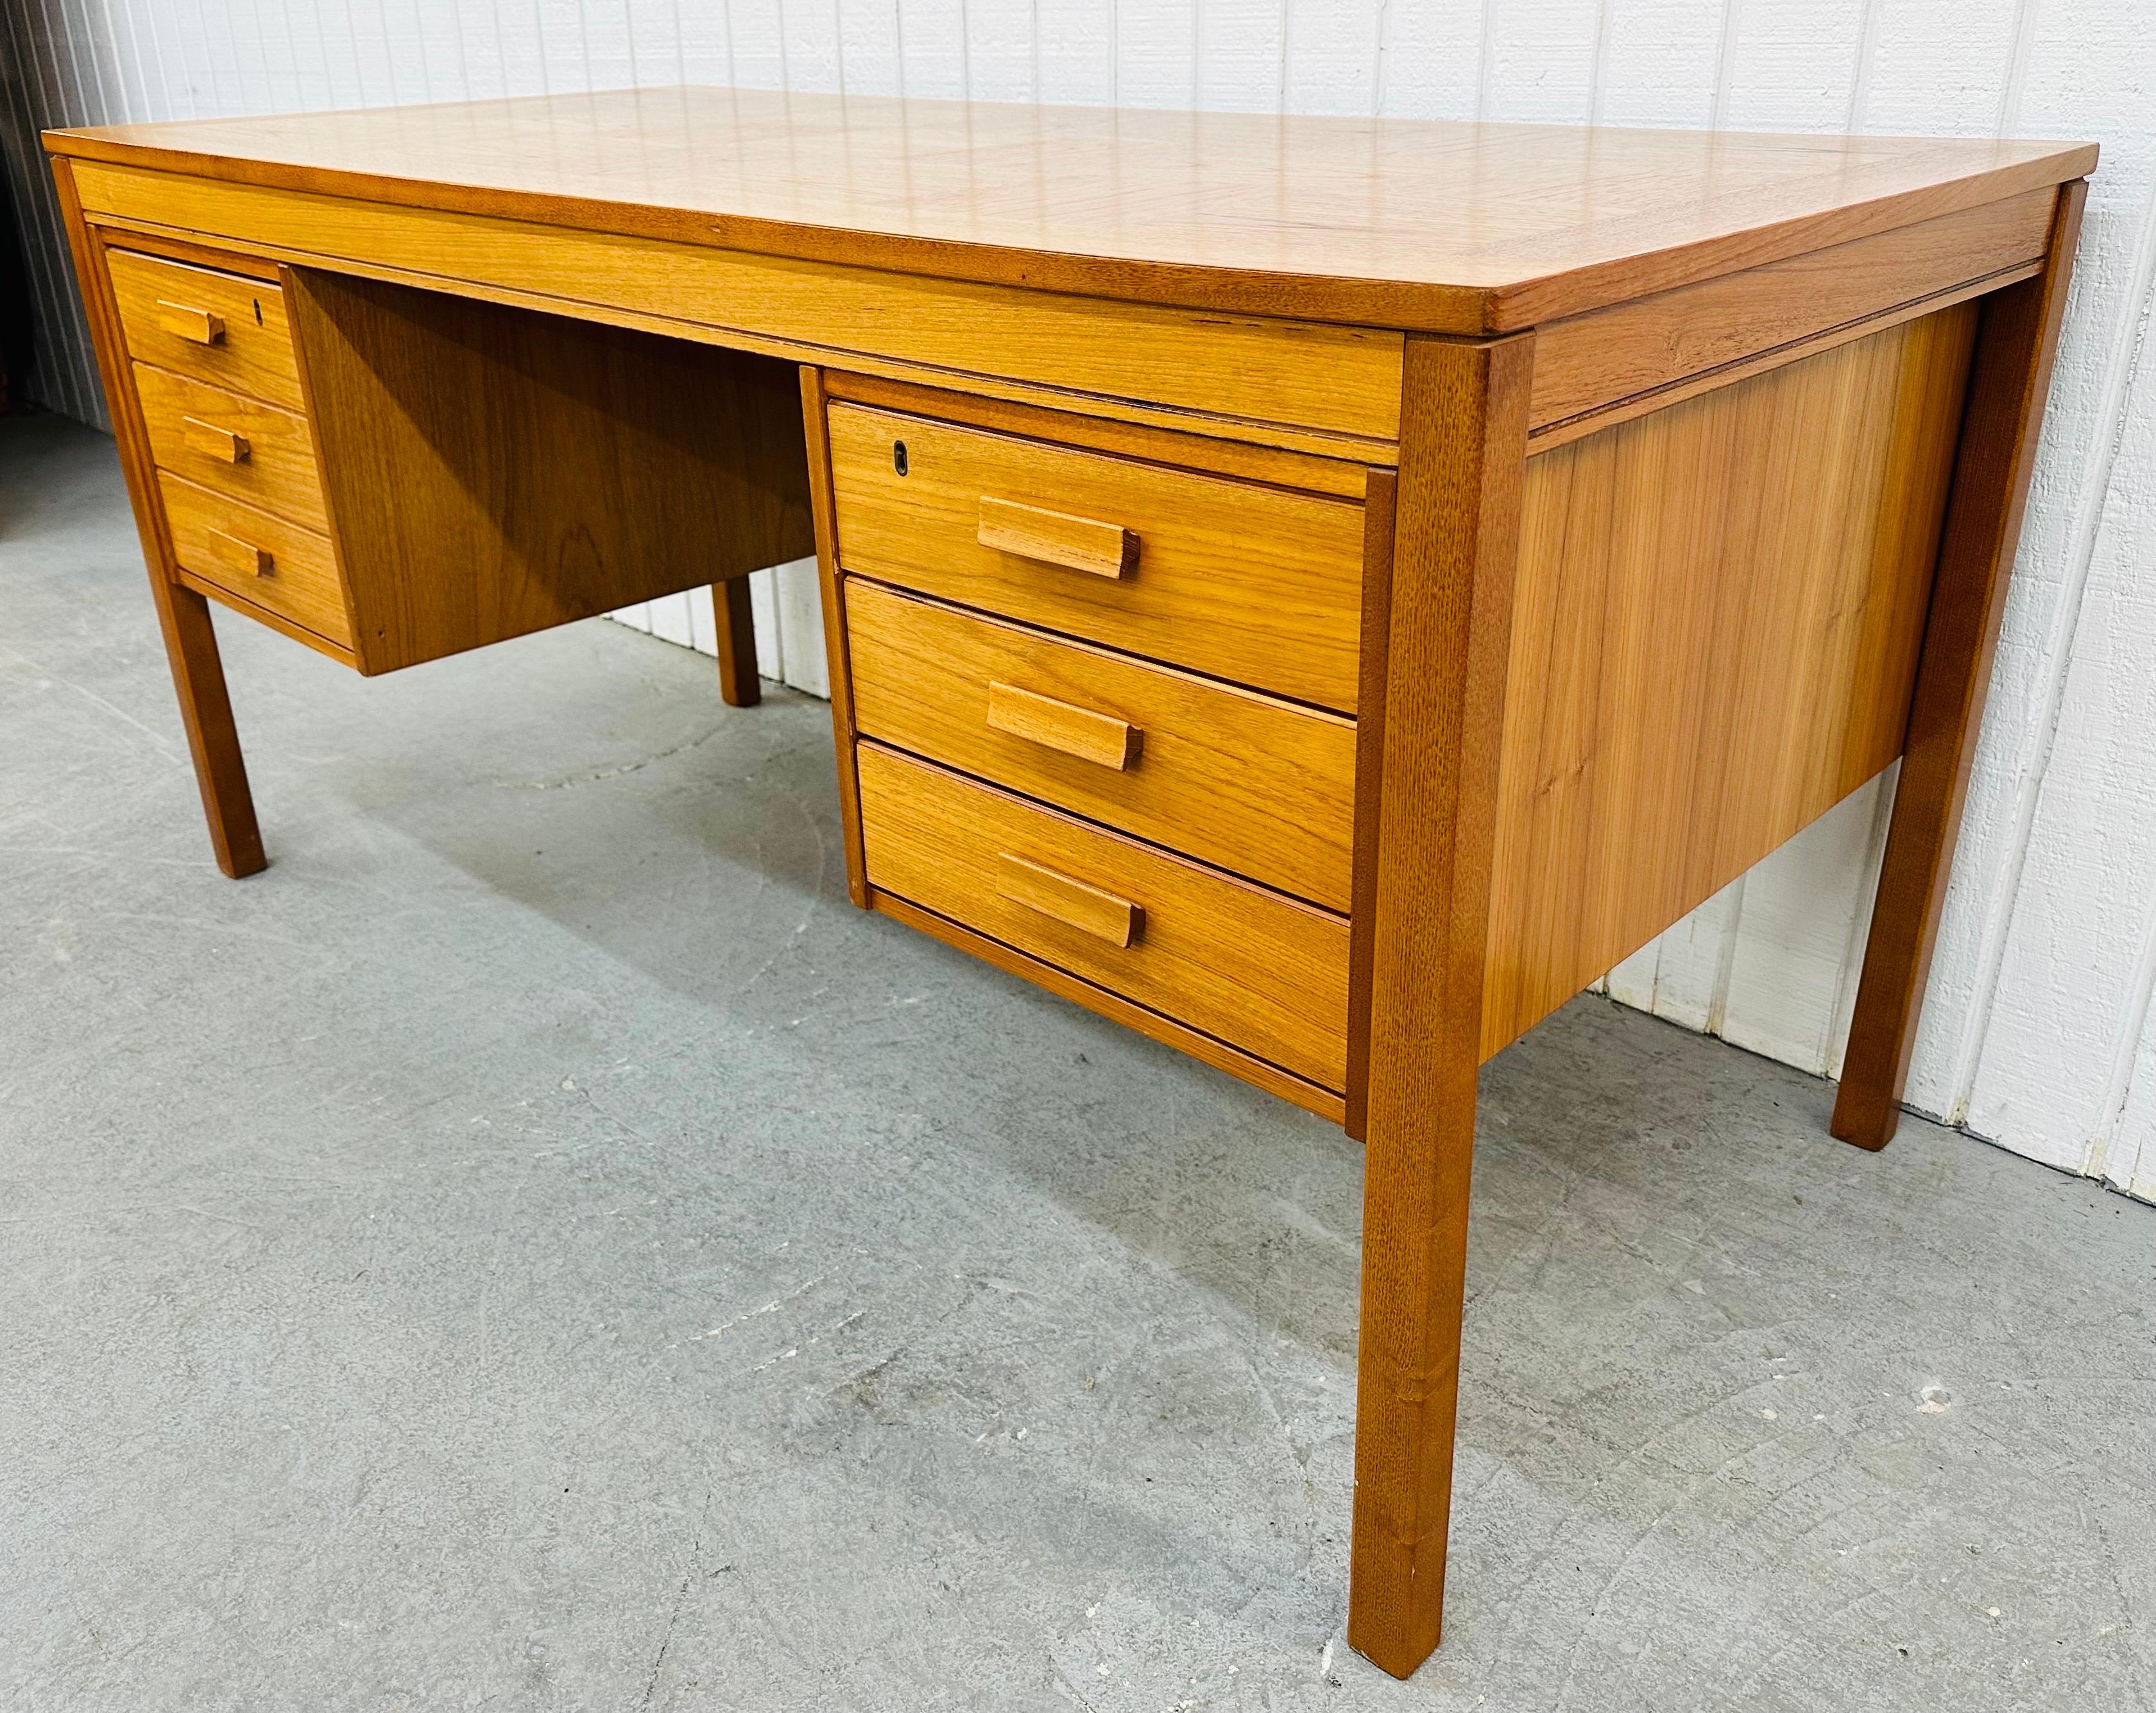 This listing is for a vintage Danish Modern Teak Desk. Featuring a straight line design, checkerboard top, large filing cabinet drawer, three smaller drawers for storage, original teak pulls, a finished backside, and a beautiful teak finish! This is